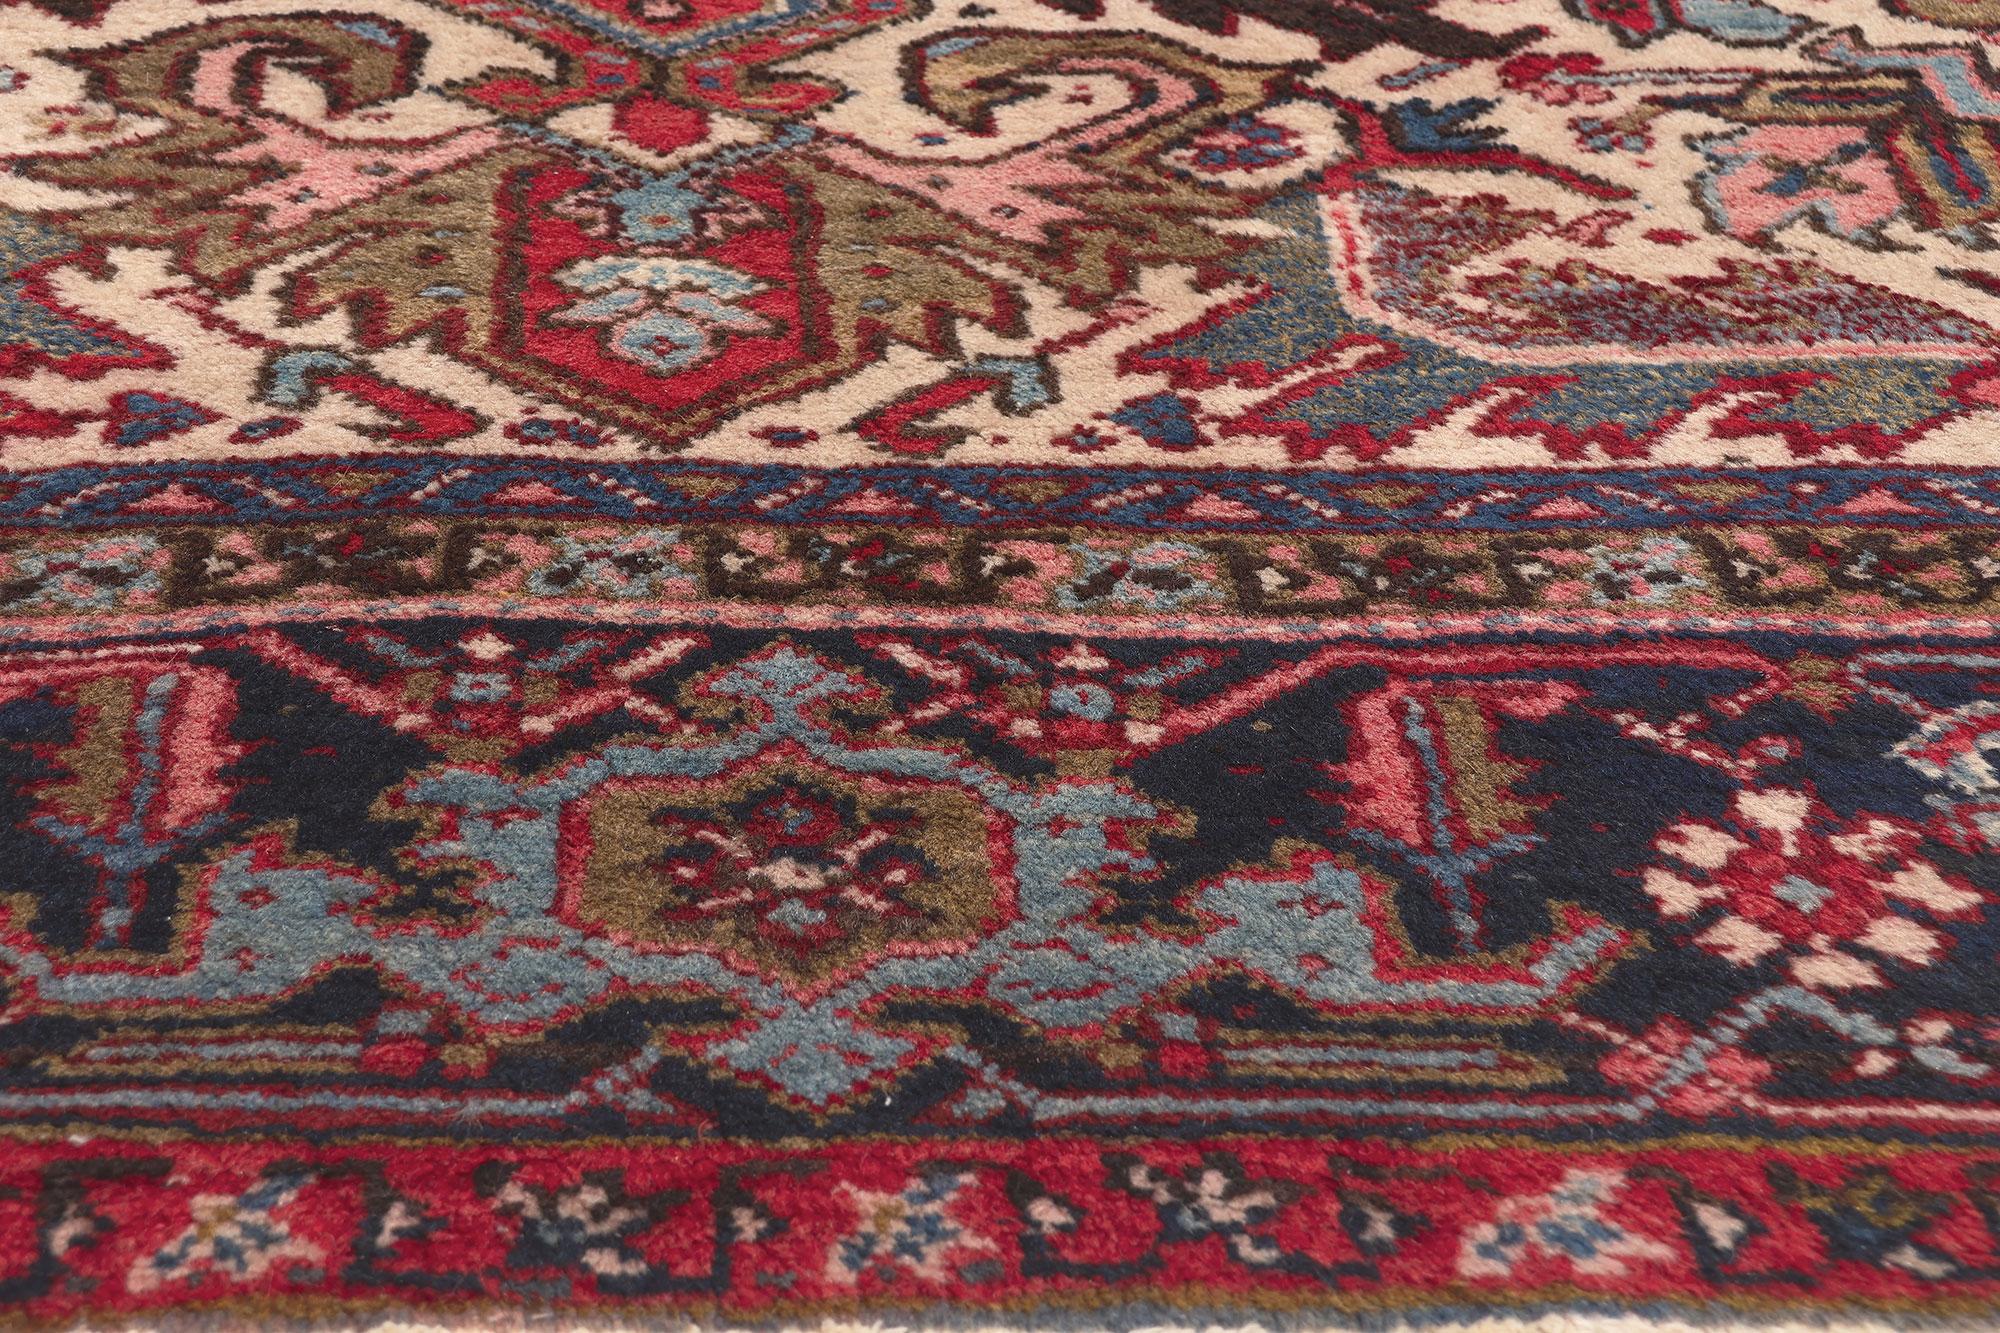 Antique Red Geometric Persian Heriz Rug, Effortlessly Chic and Versatile In Good Condition For Sale In Dallas, TX